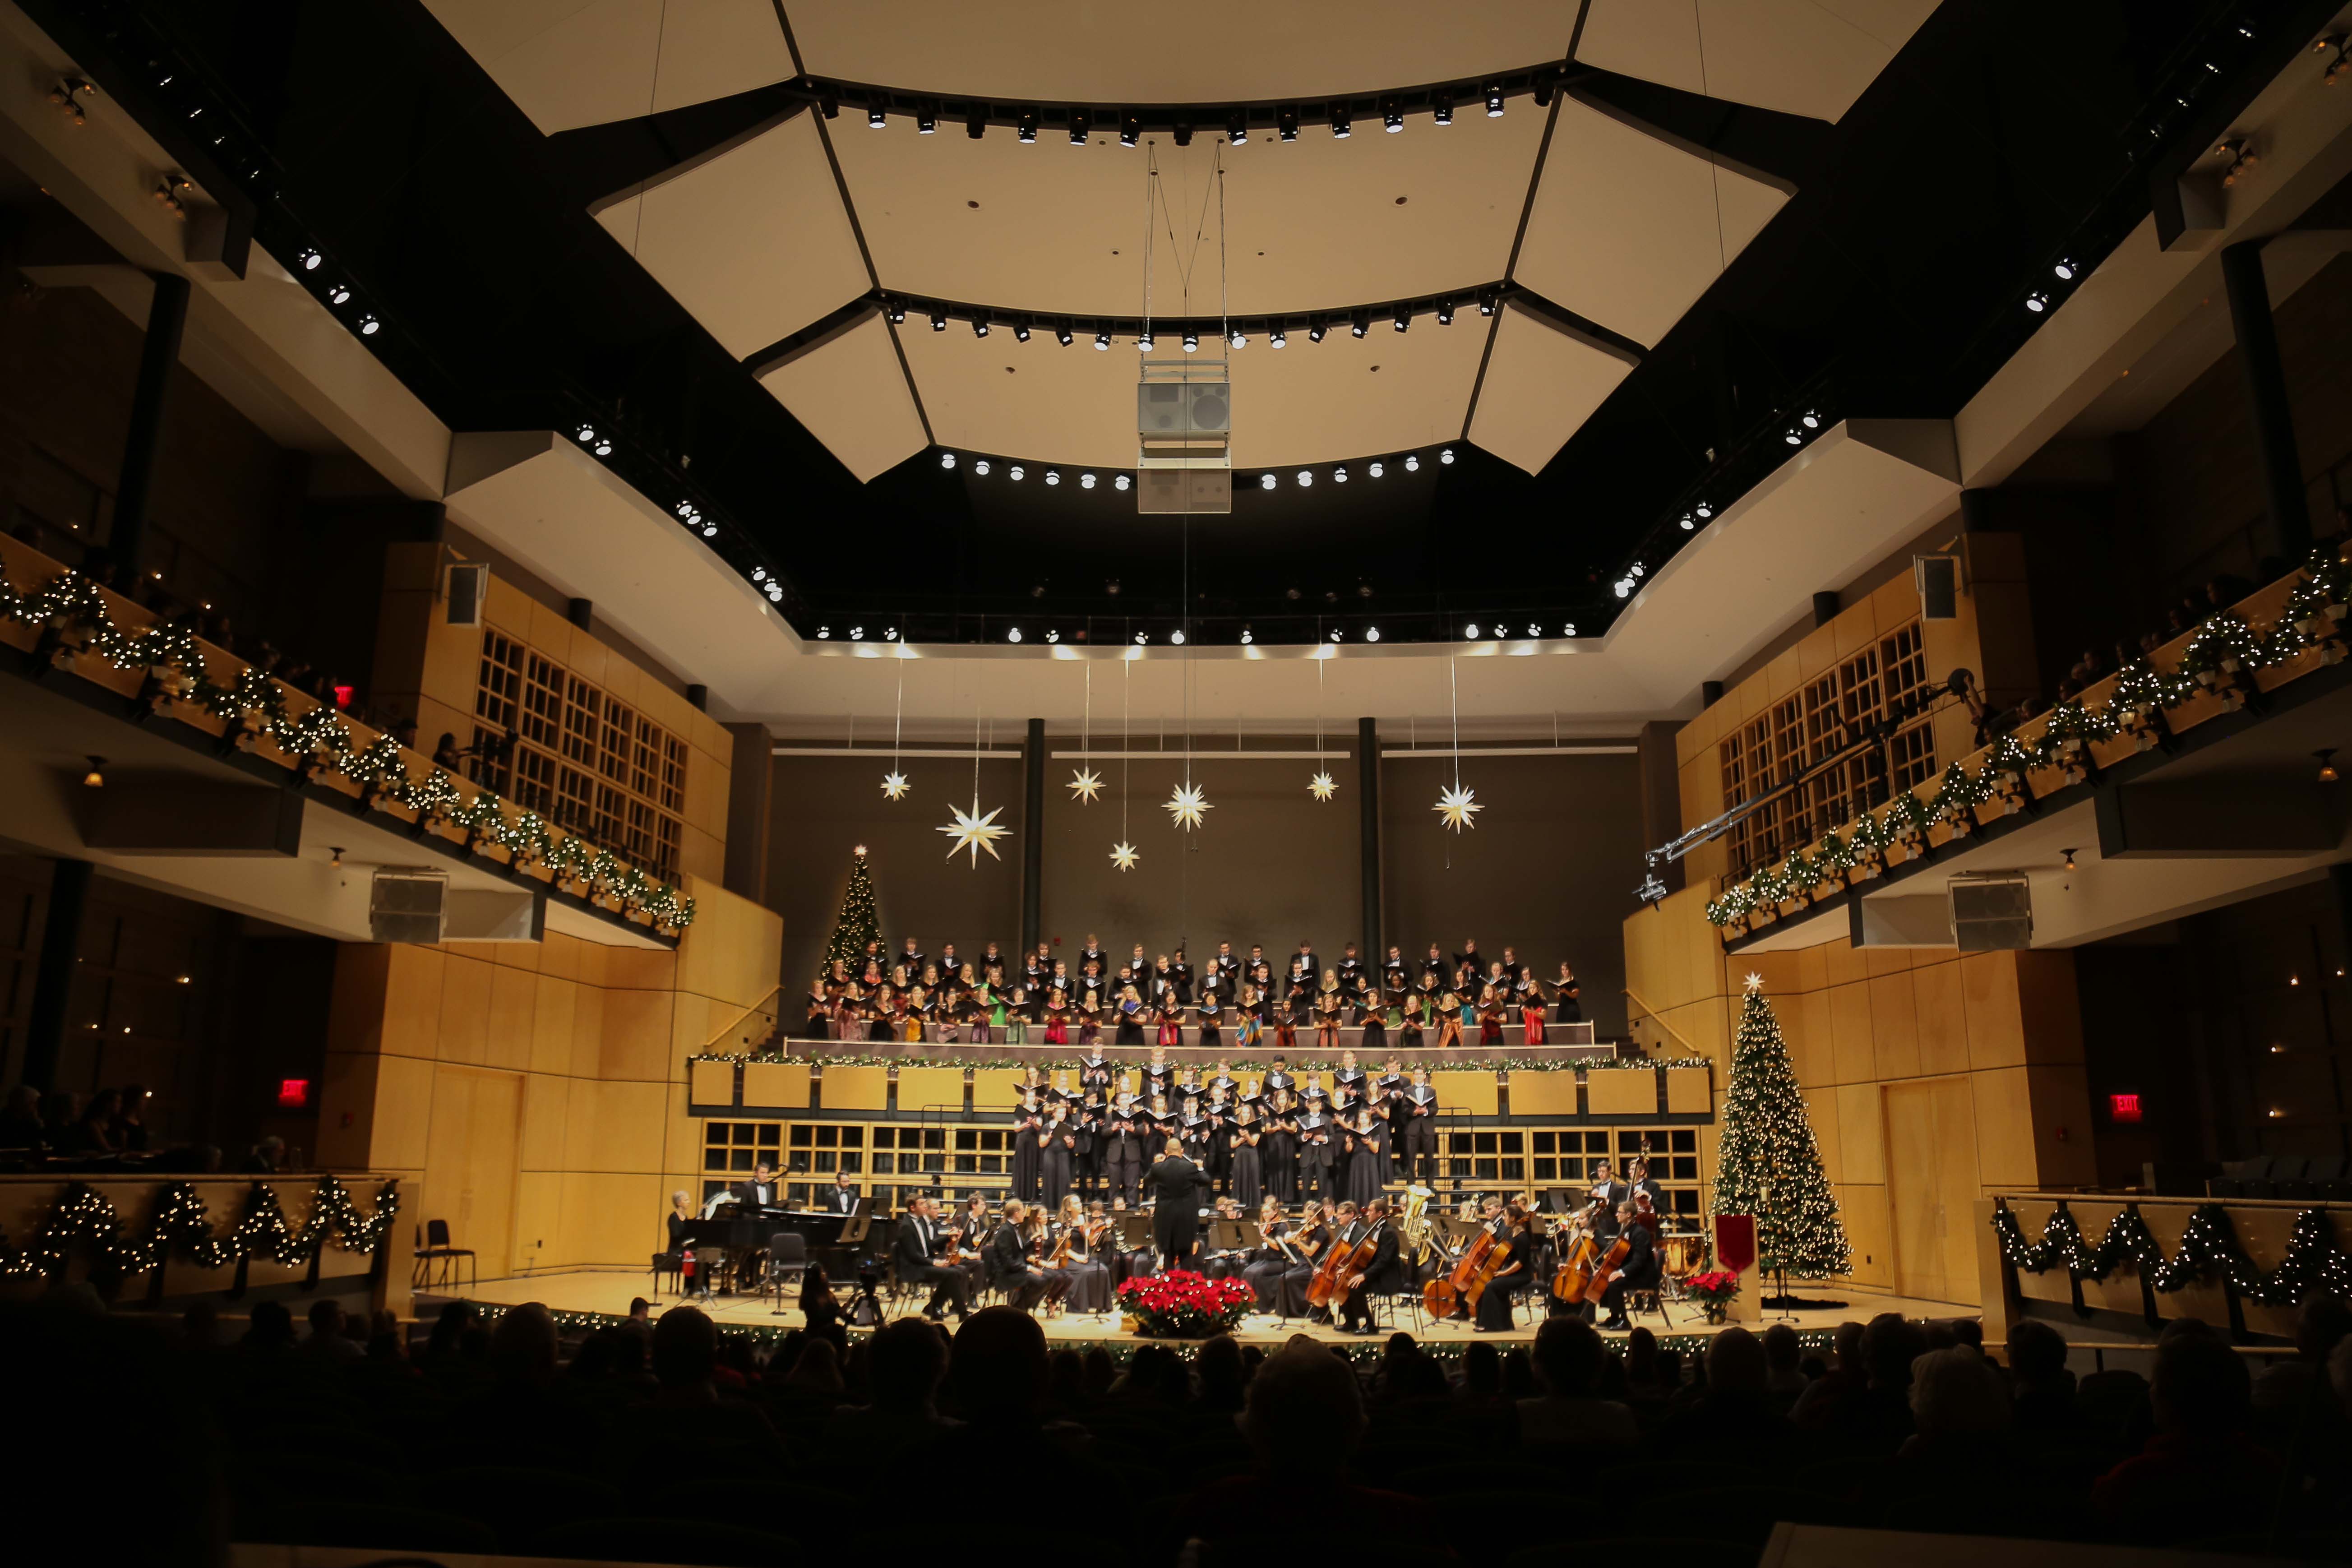 Tickets on sale for 15th annual Festival of Carols scheduled Dec. 79